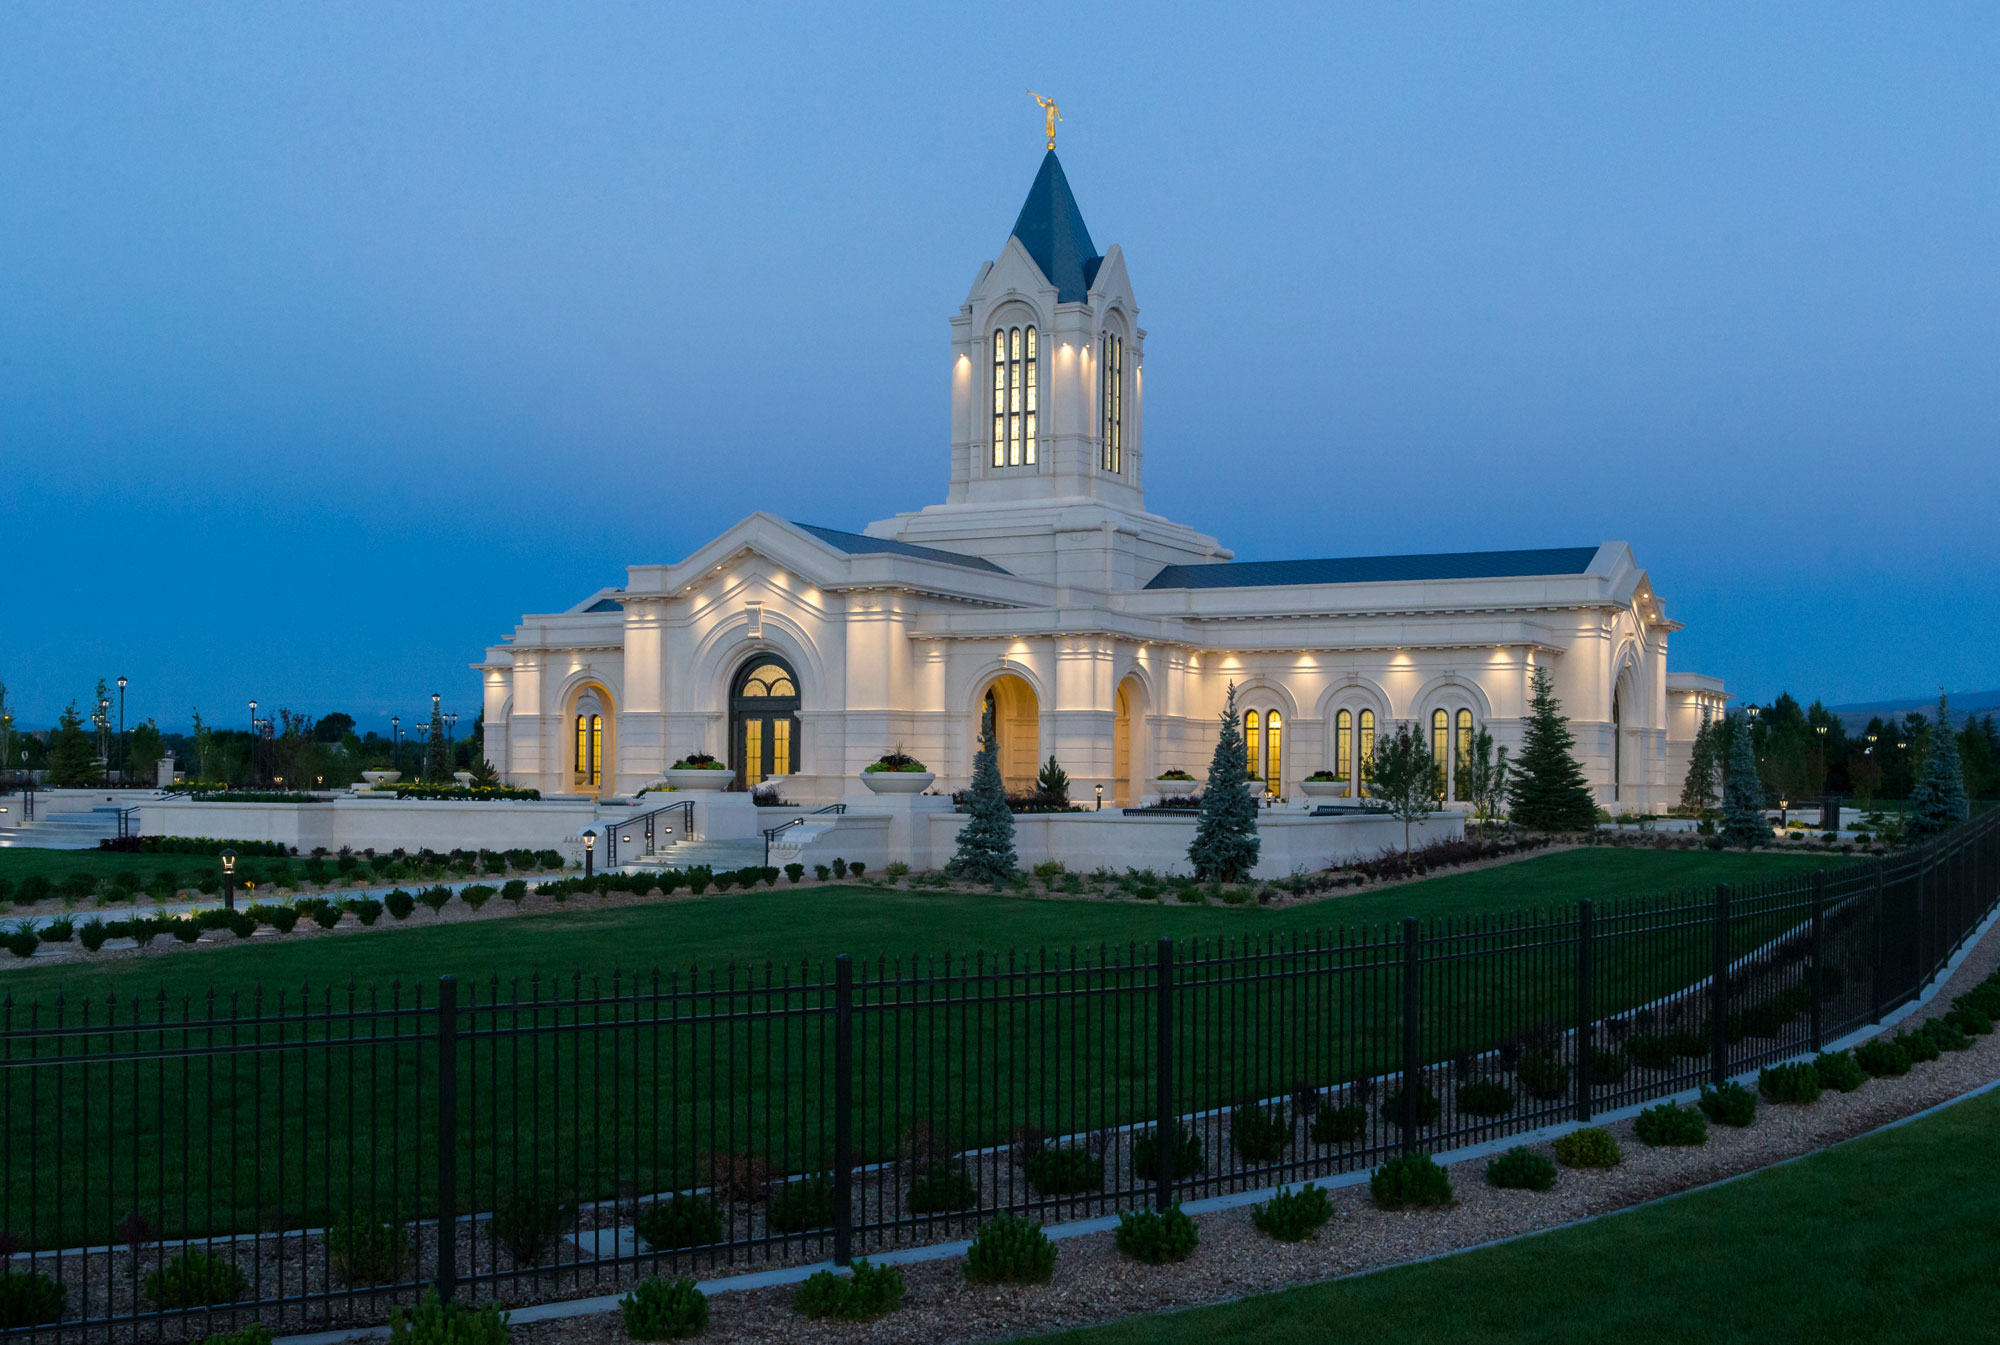 An image of the Fort Collins Colorado Temple. The temple is online one floor tall but has a tower in the middle. The photograph was taken in the evening, and the sky and lawn are darkening, while all the lights in the temple are on.